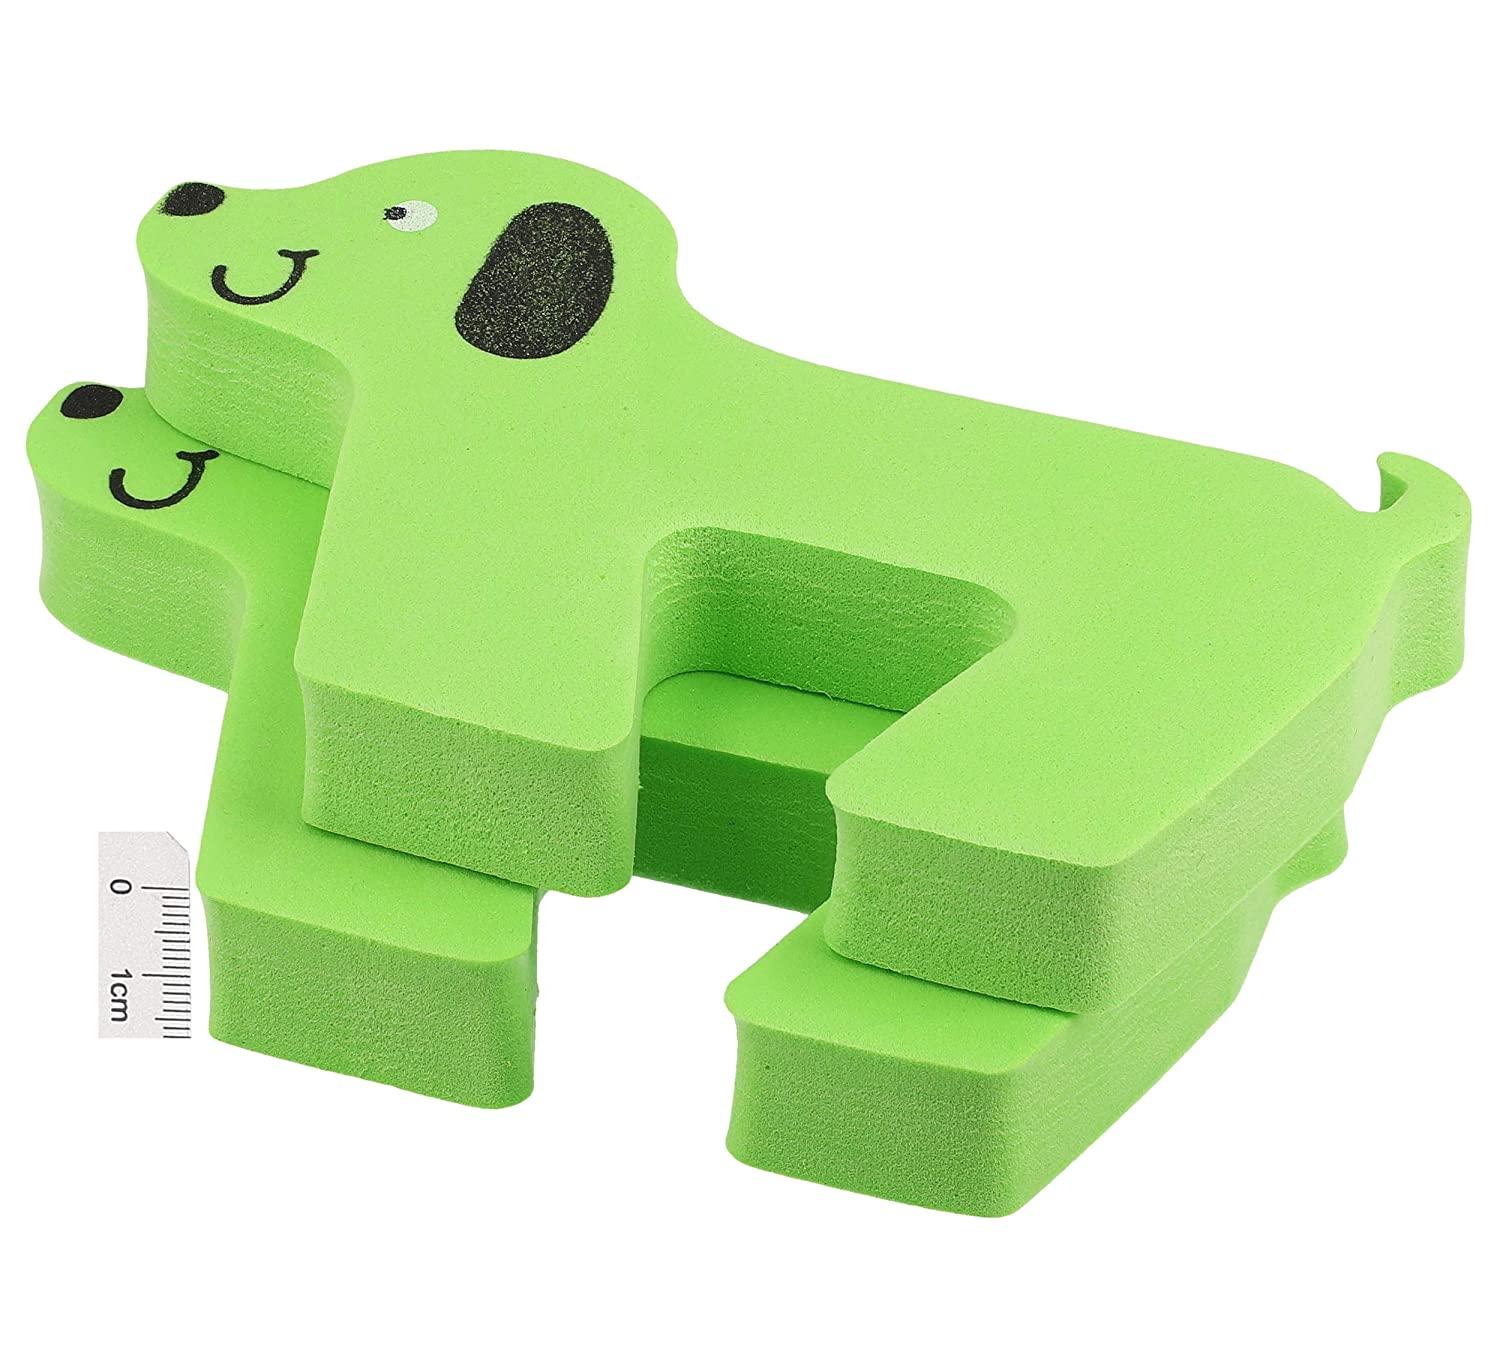 Hot Door Stopper Clamping Protection for Doors and Windows Plastic Green Dog